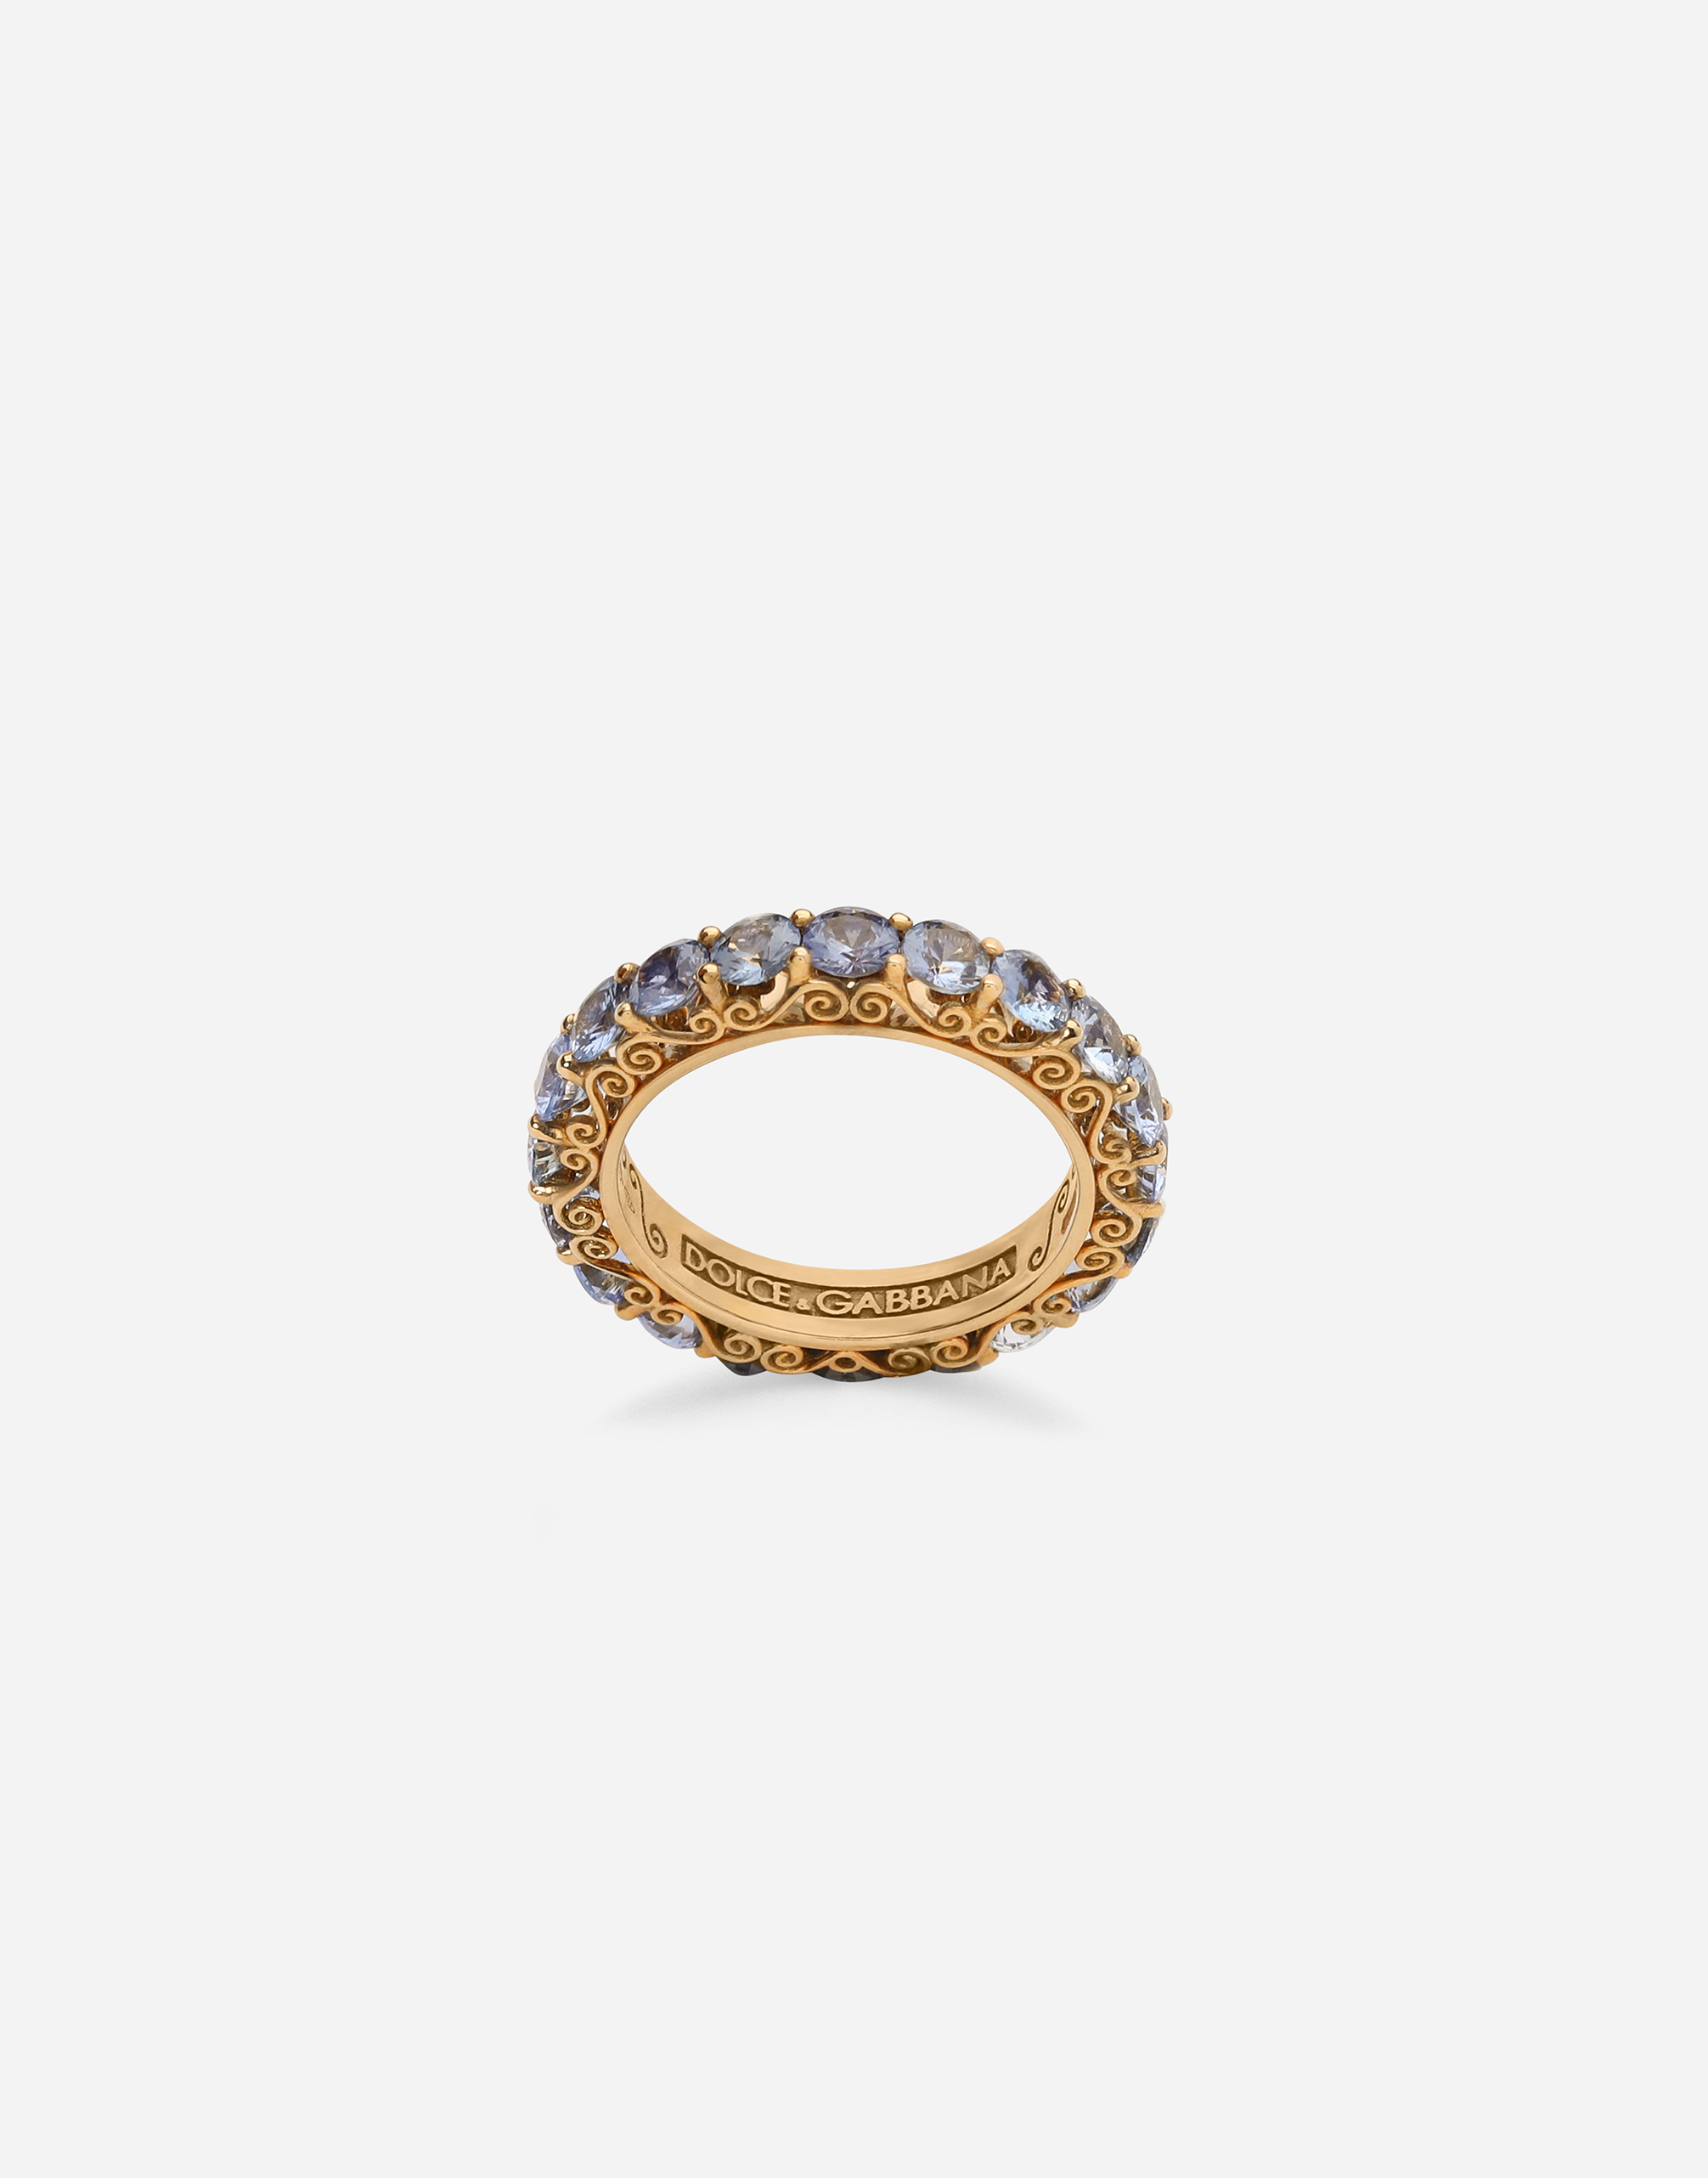 Heritage band ring in yellow 18kt gold with light blue sapphires in Gold